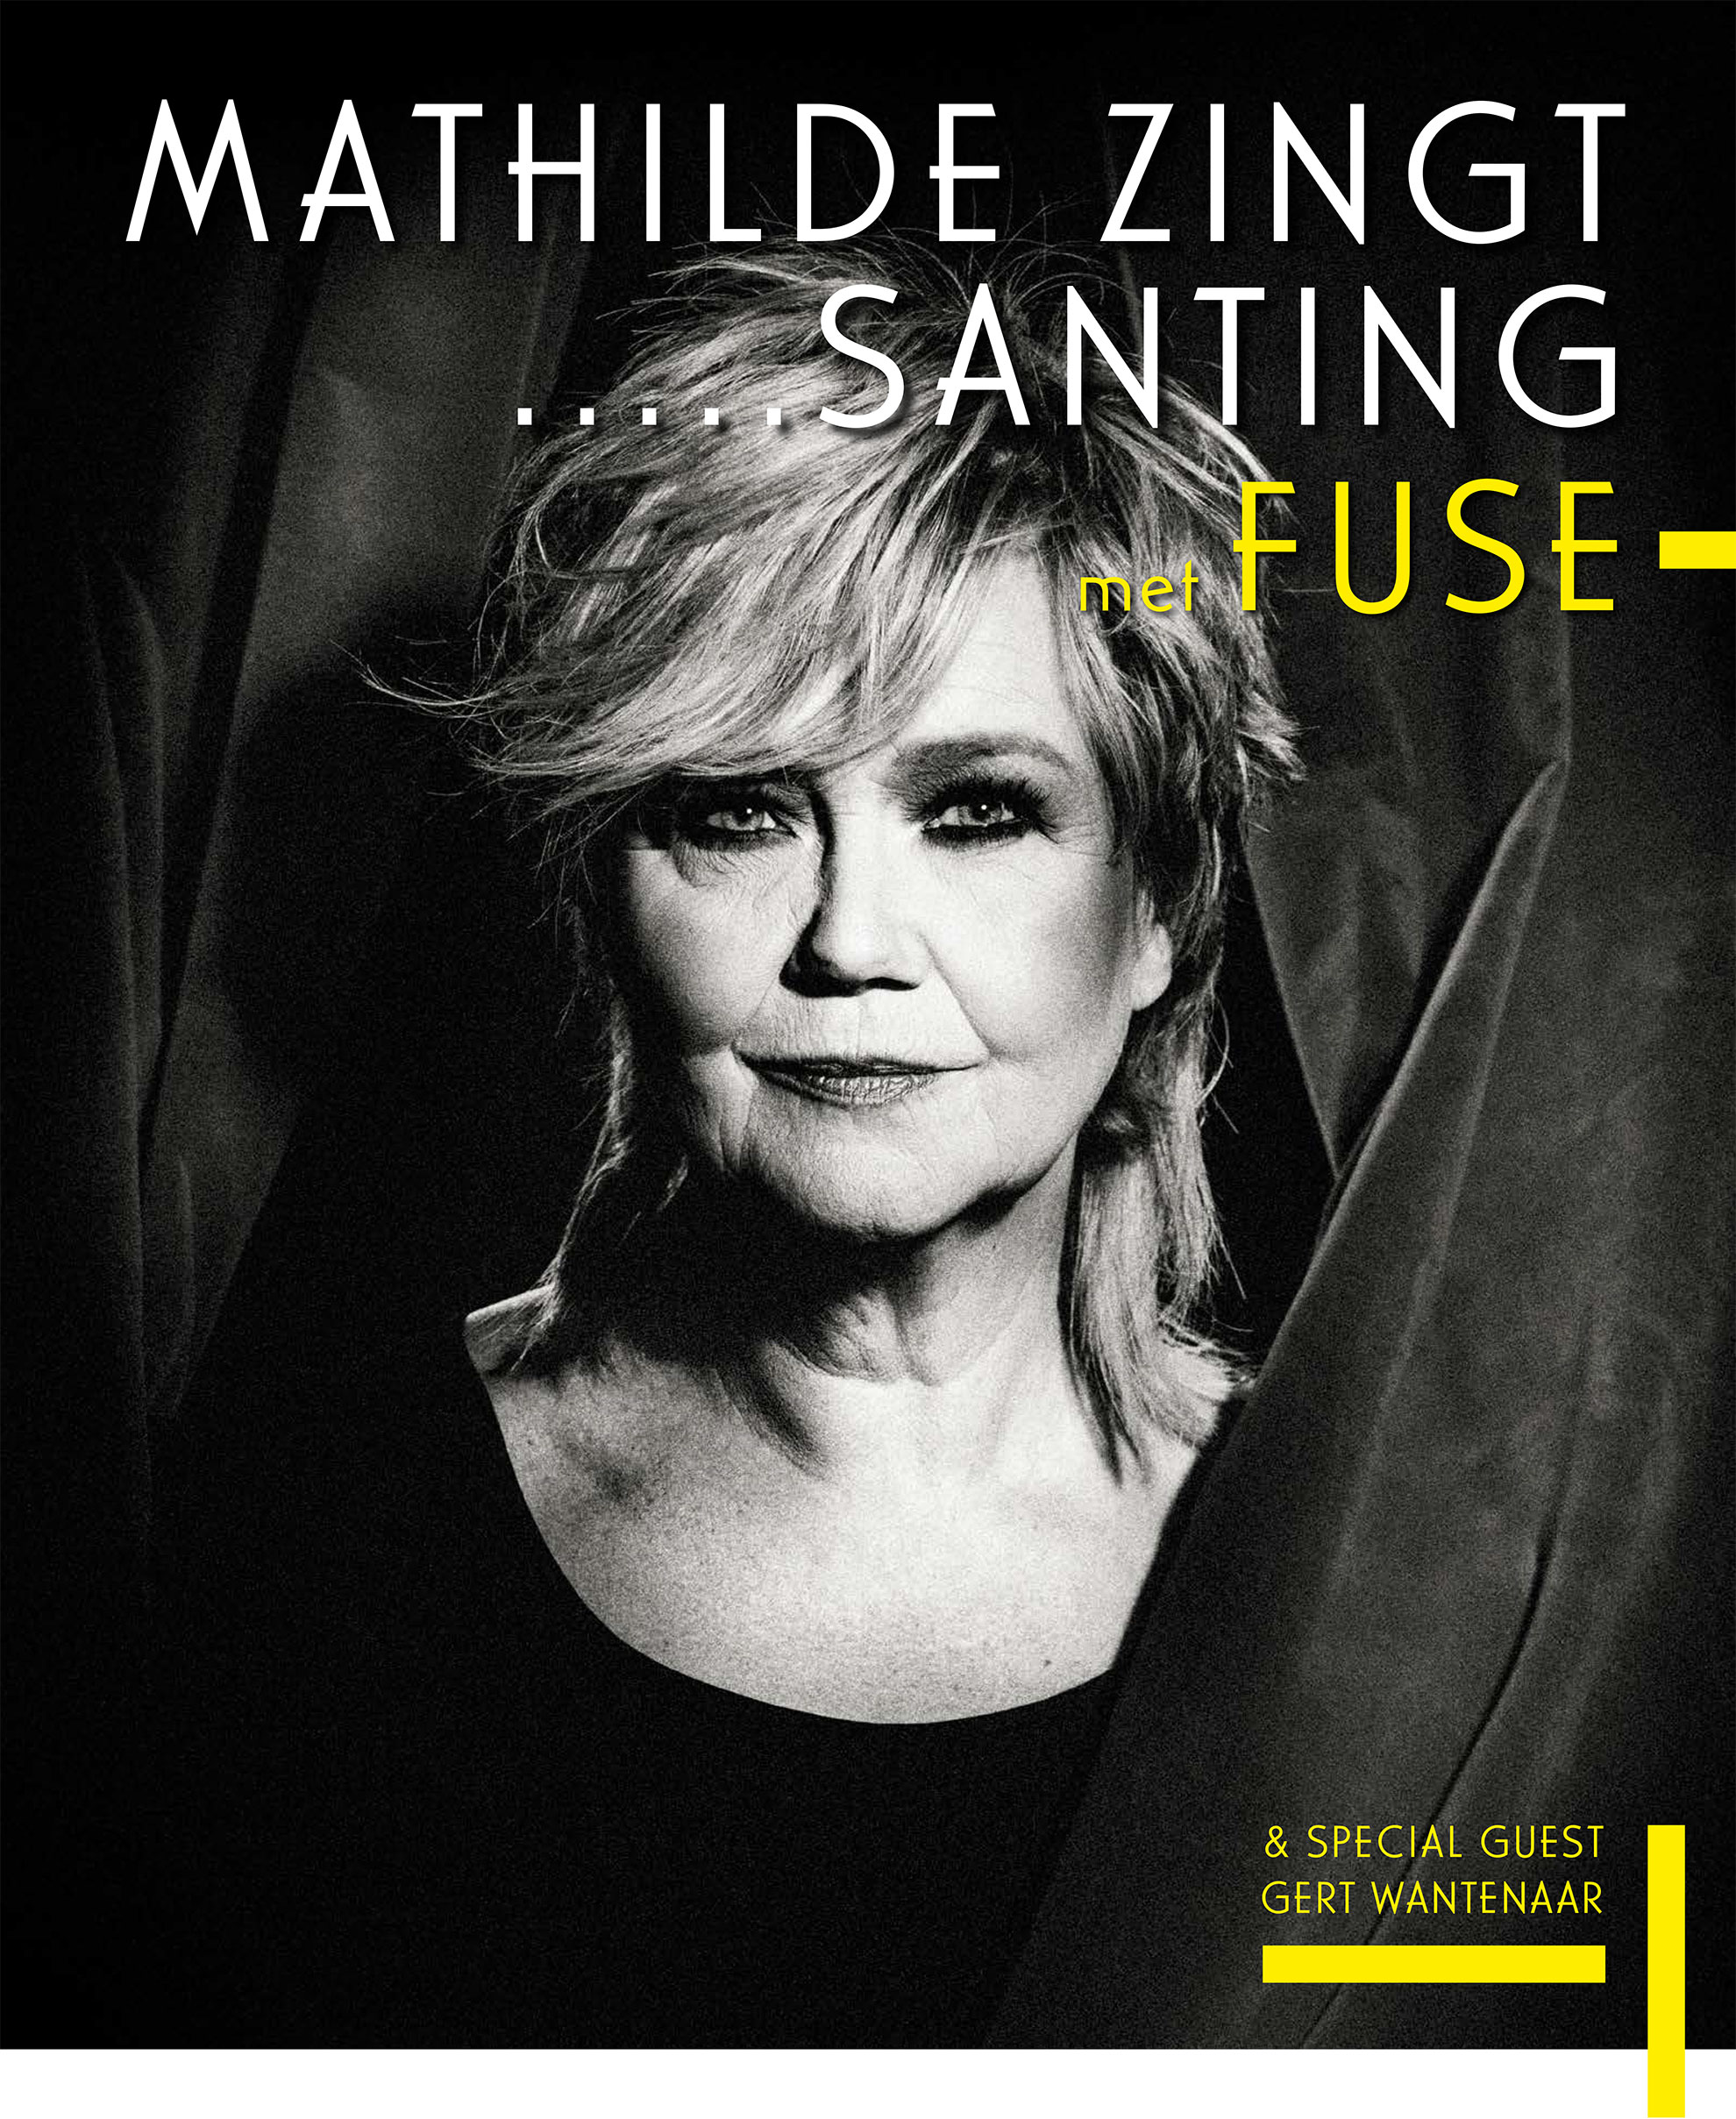 Tour poster - Mathilde Santing and Fuse